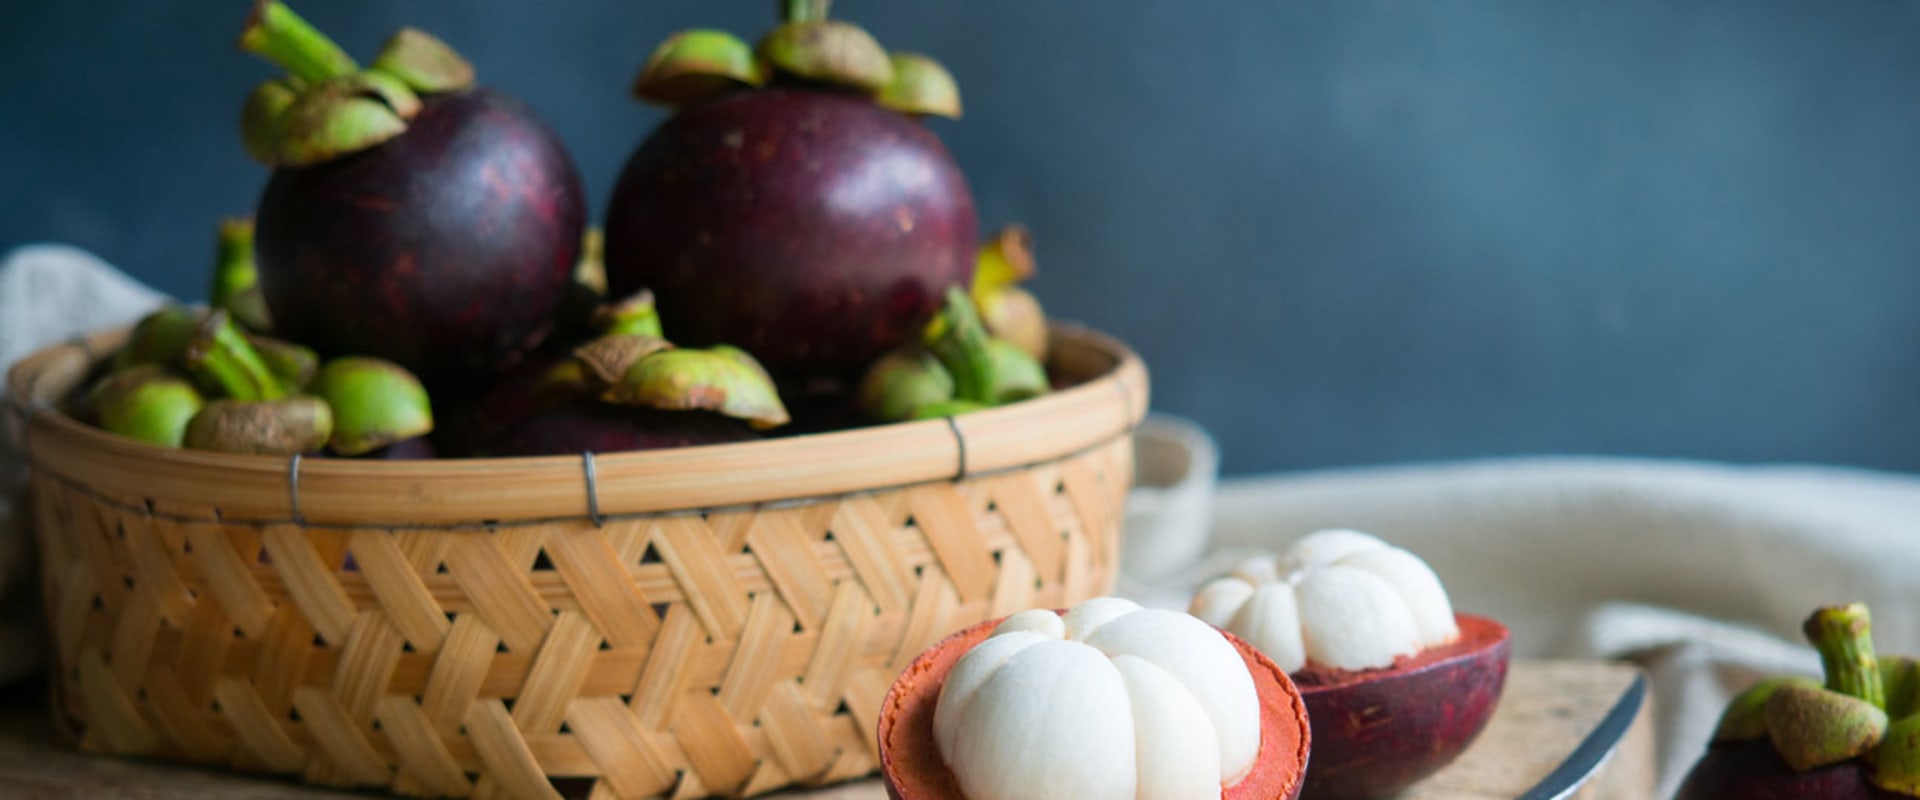 Why is mangosteen not healthy?